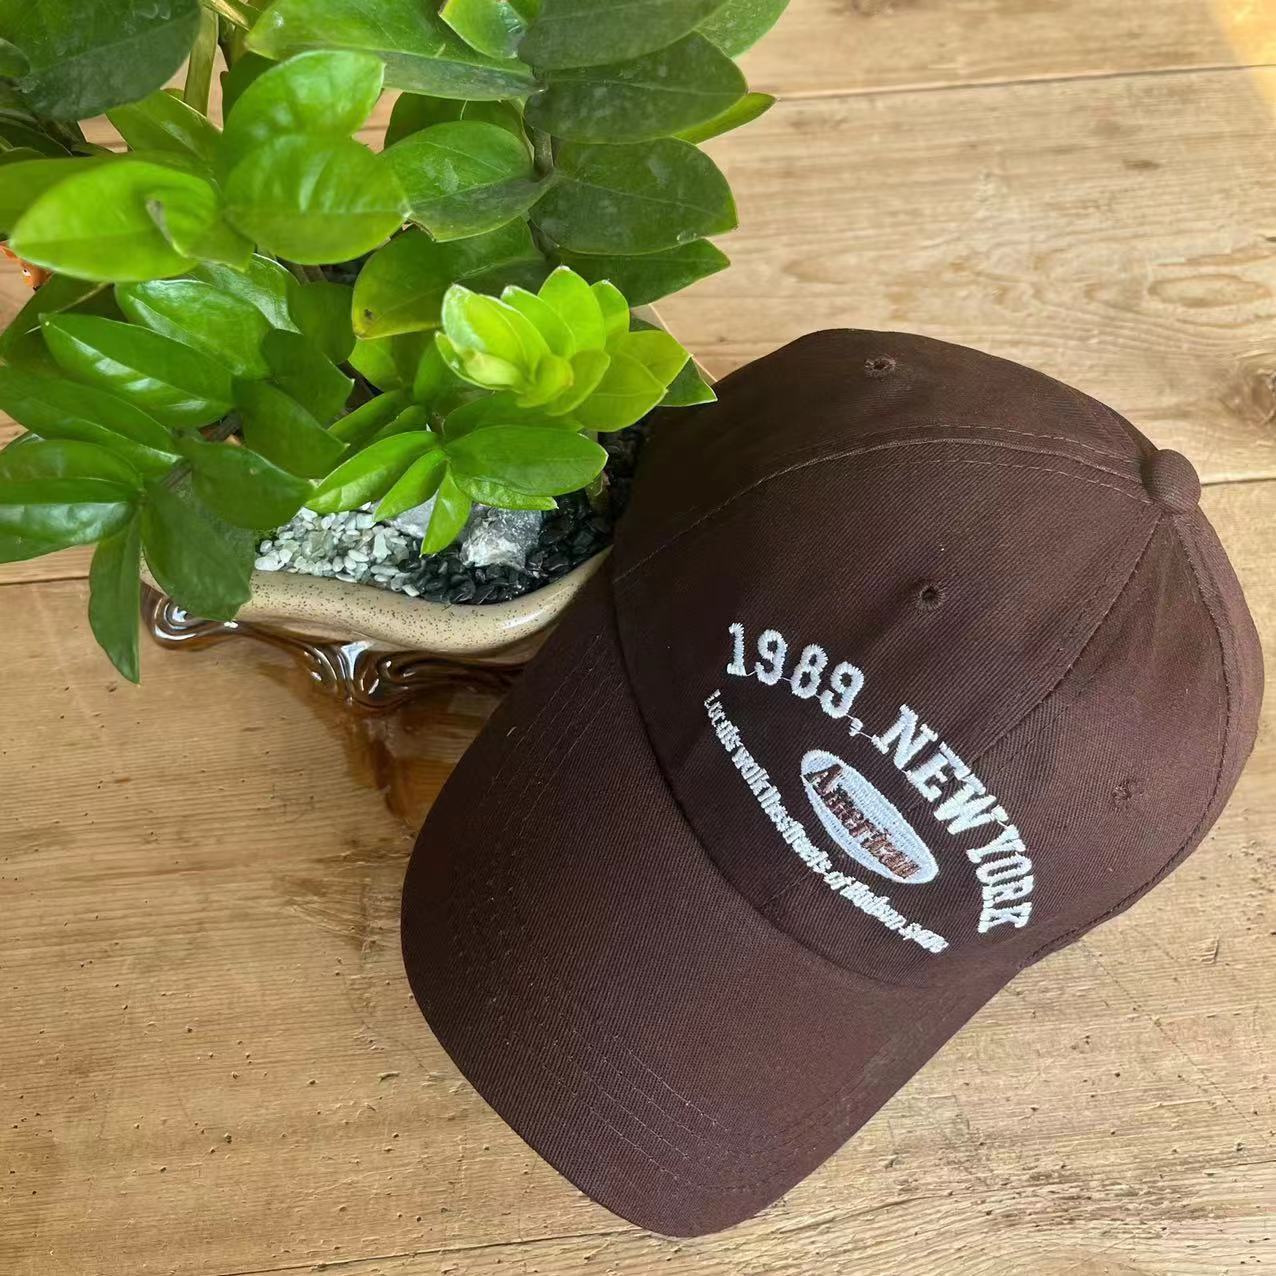 New Baseball Cap Men's and Women's Four Seasons All-Match Street Letter Embroidery 1989 Peaked Cap Summer Couple Korean Style